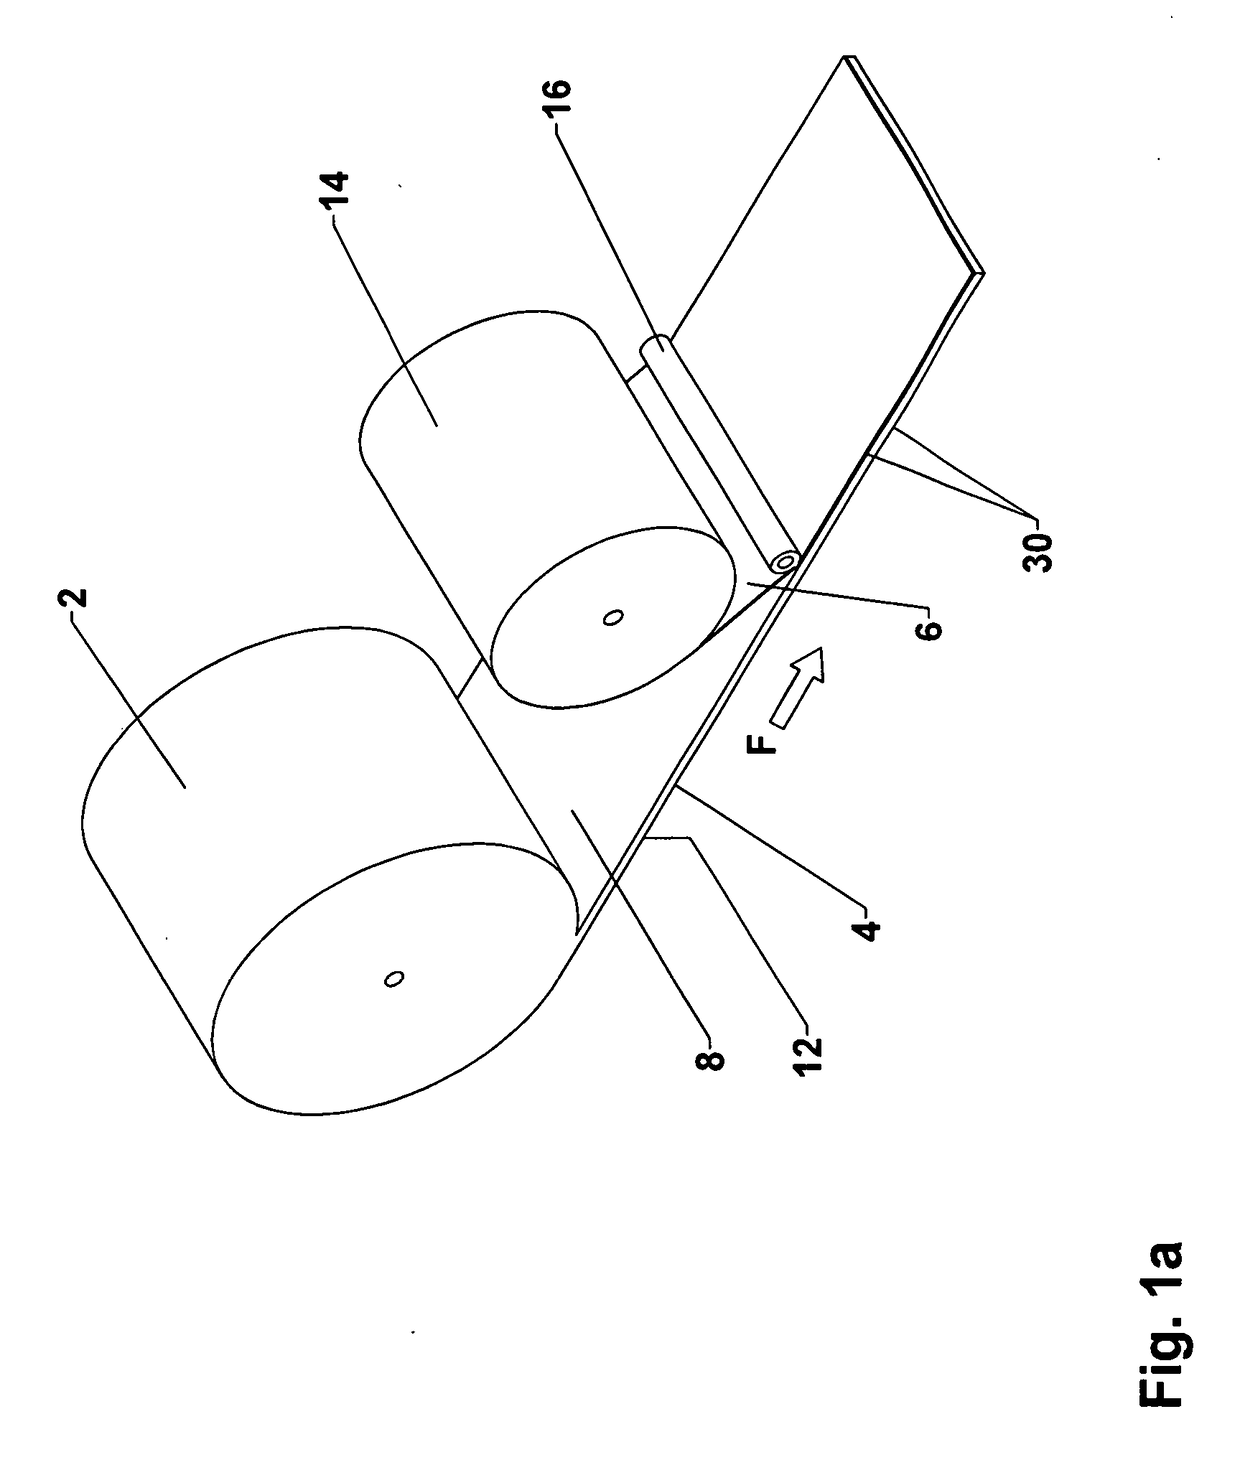 Method for the Production of a Sealing Tape Roll